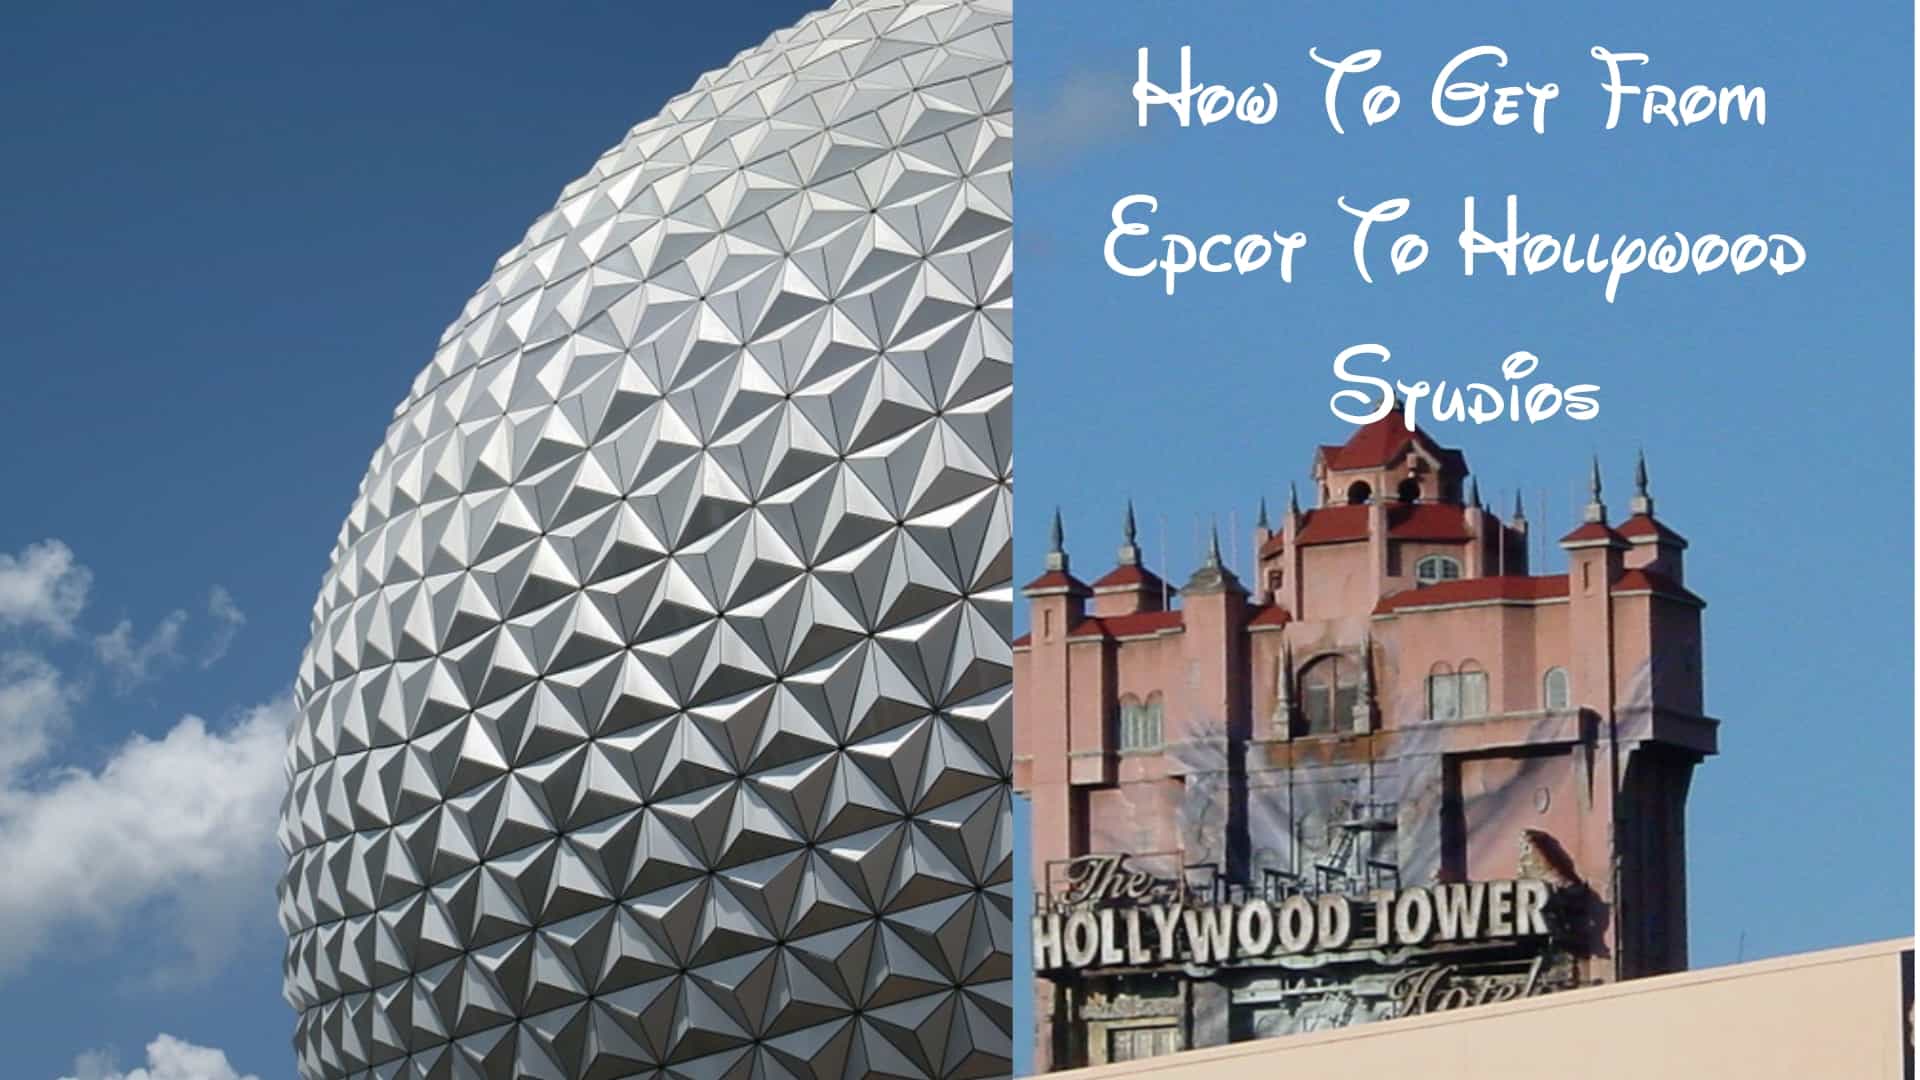 Ultimate Guide To Epcot at Disney World Epcot 20